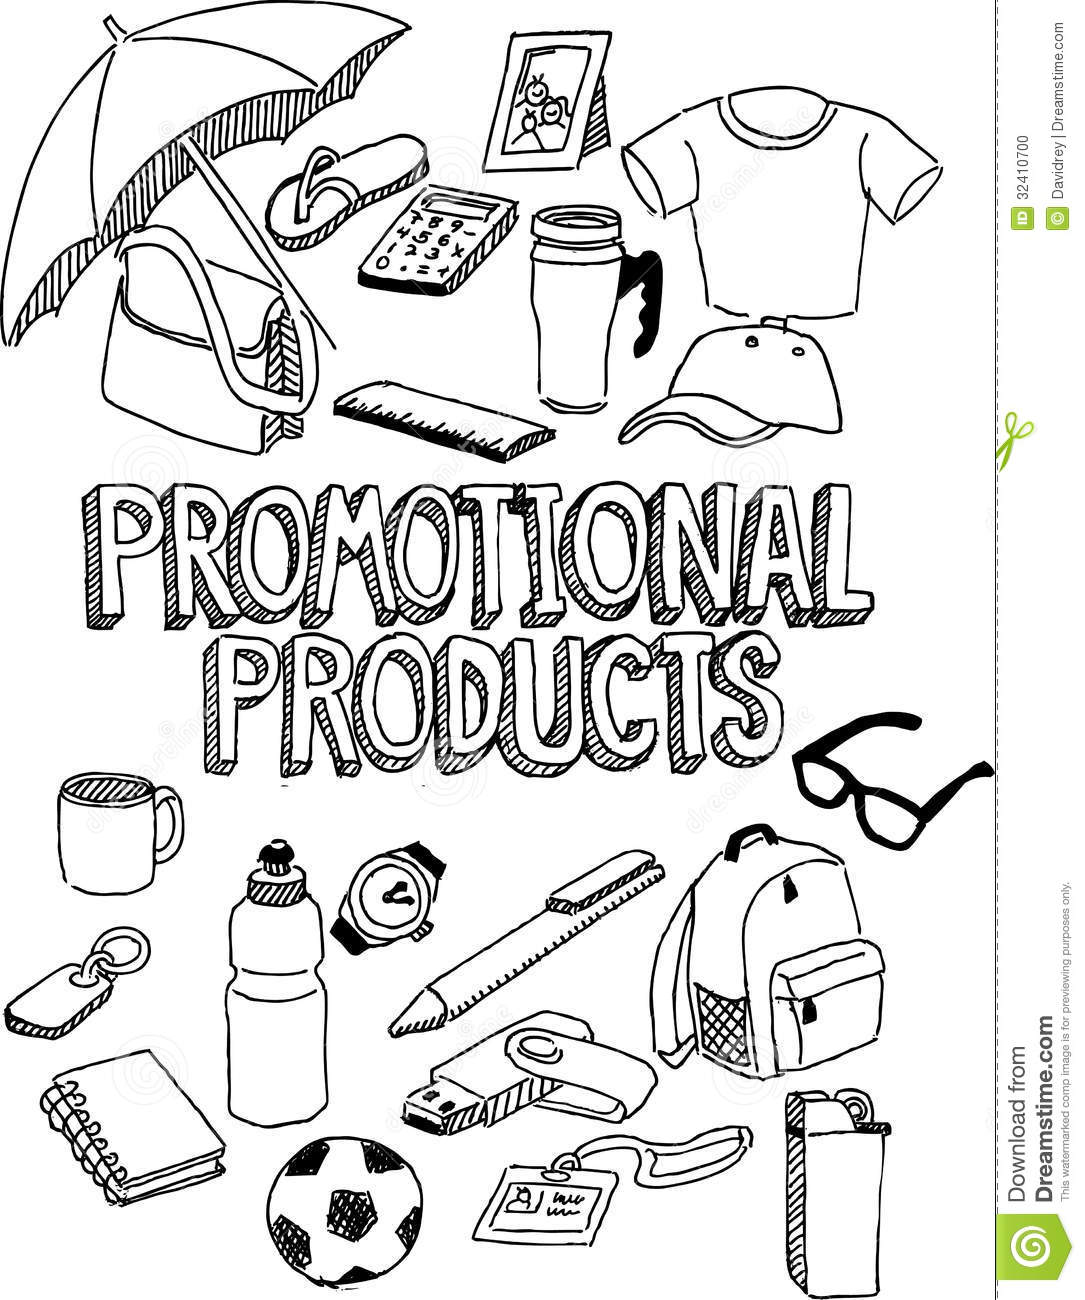 Promotional Products Doodle Stock Photo   Image  32410700